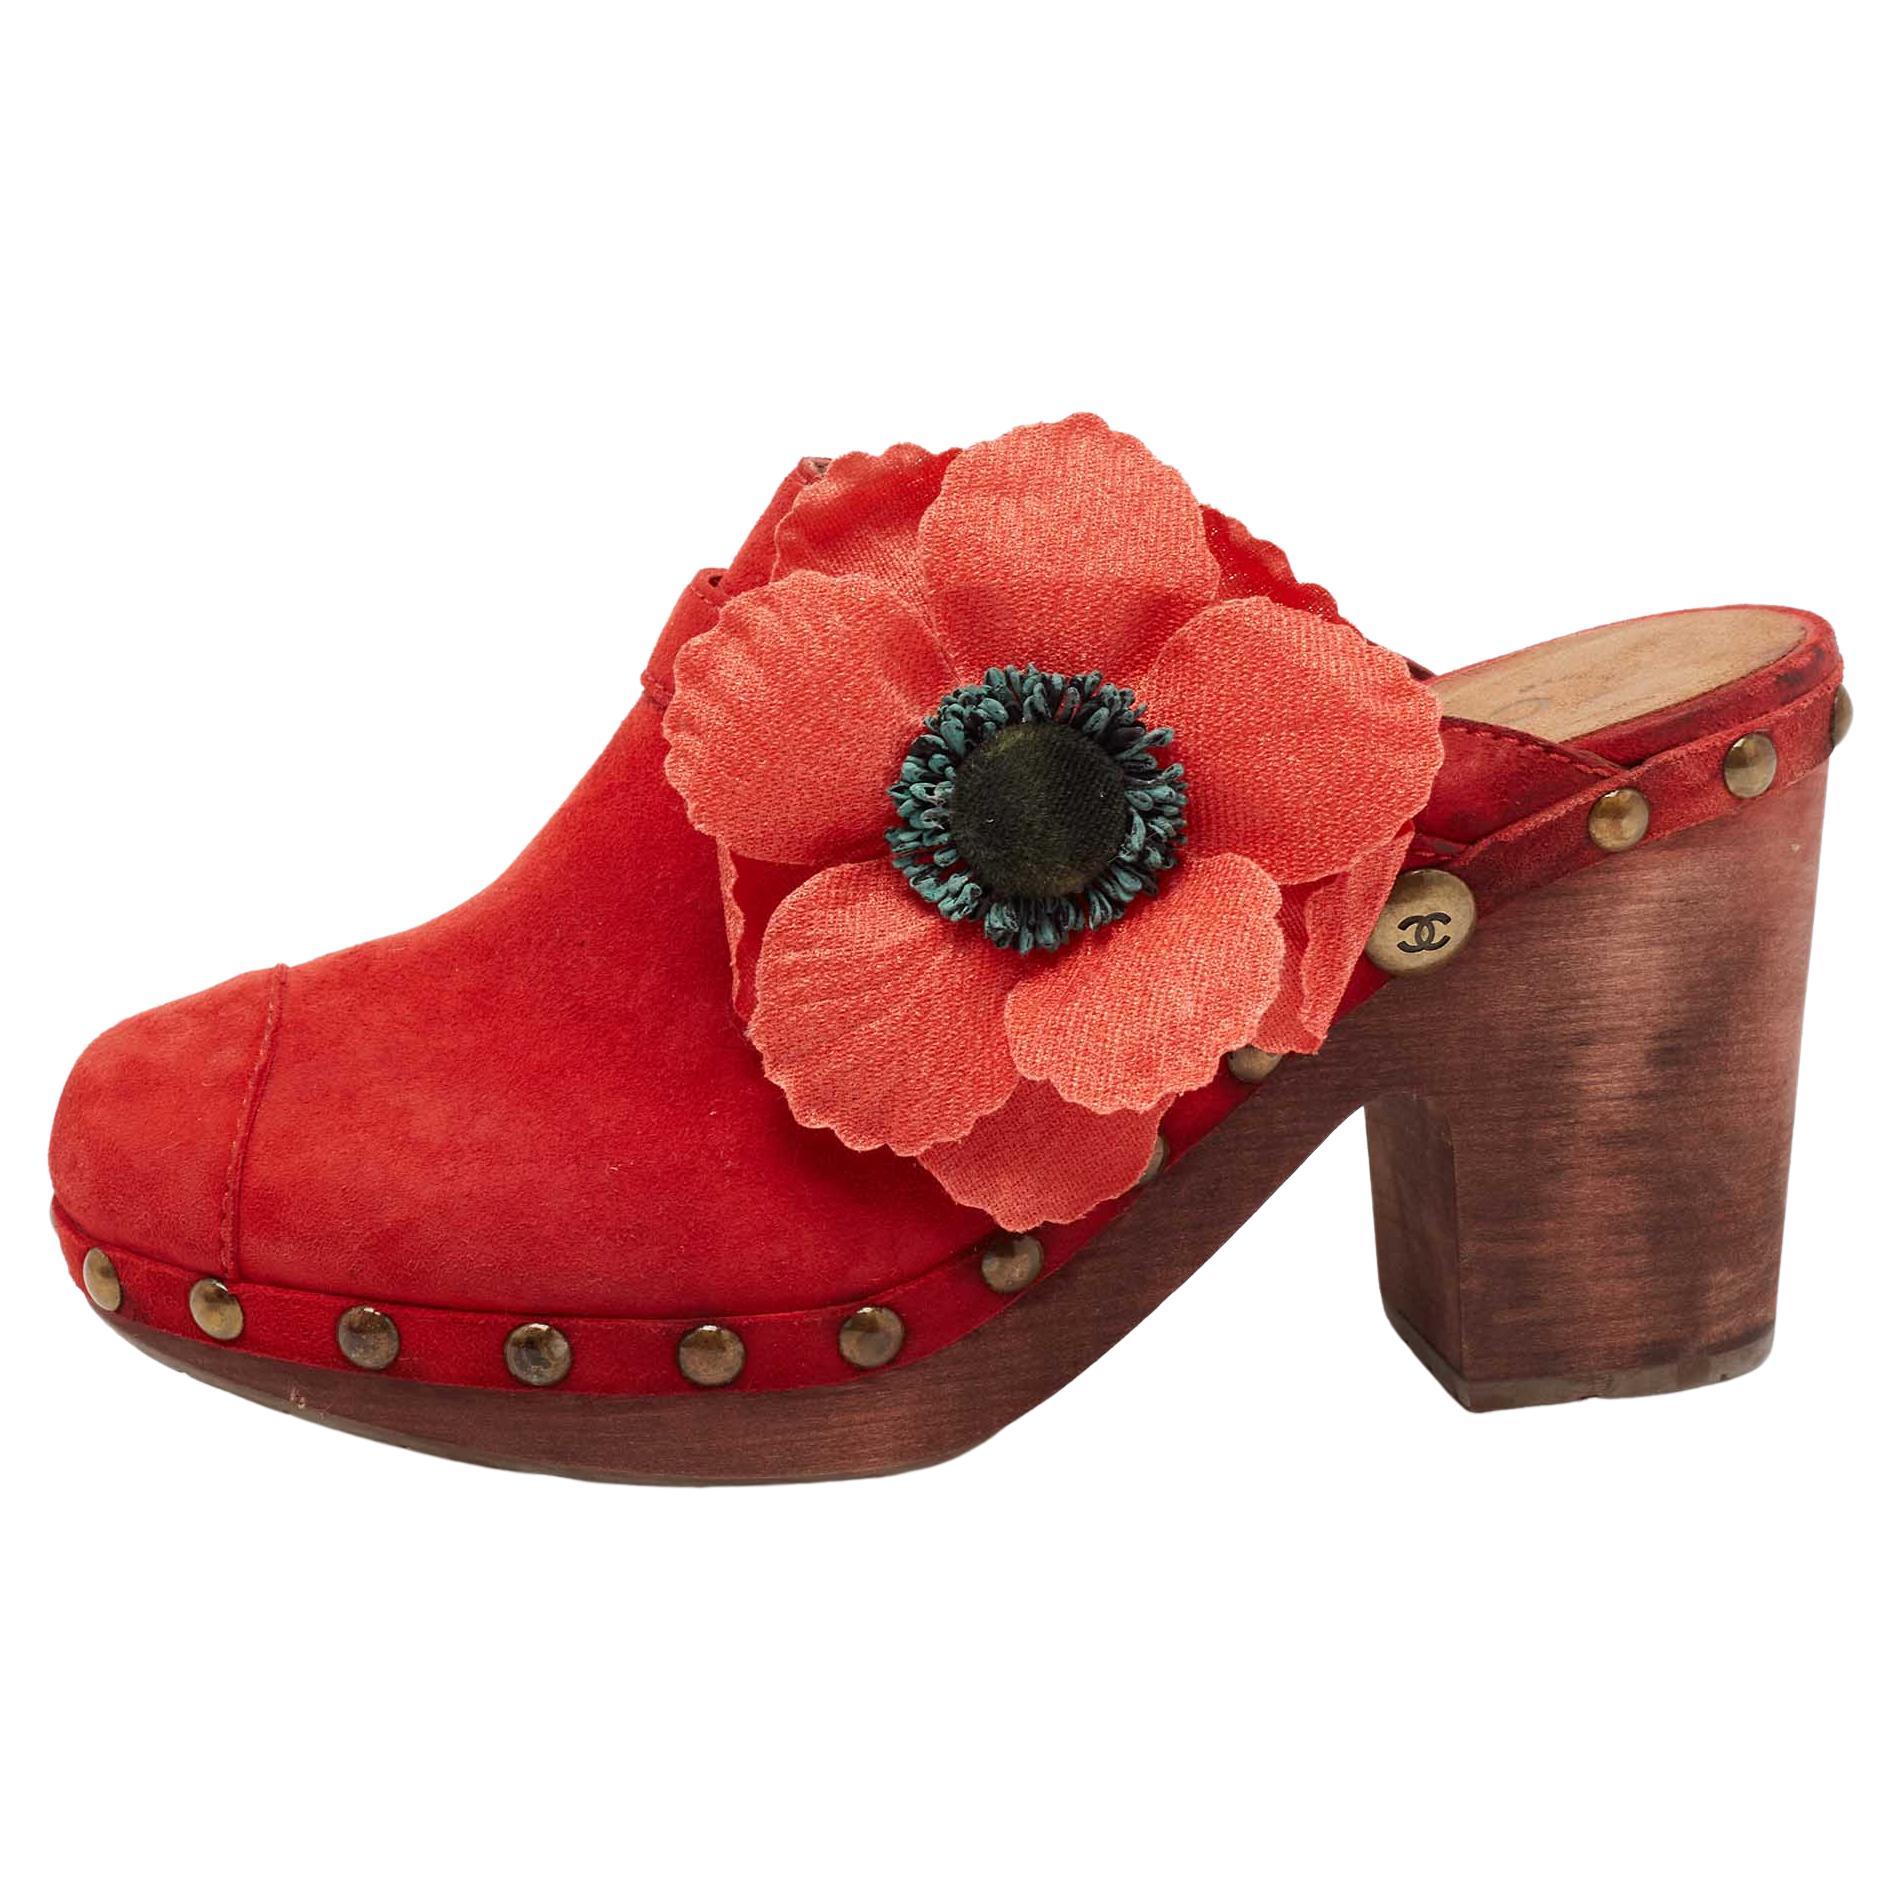 Chanel Red Suede Studded Wood Platform Clogs Size 41